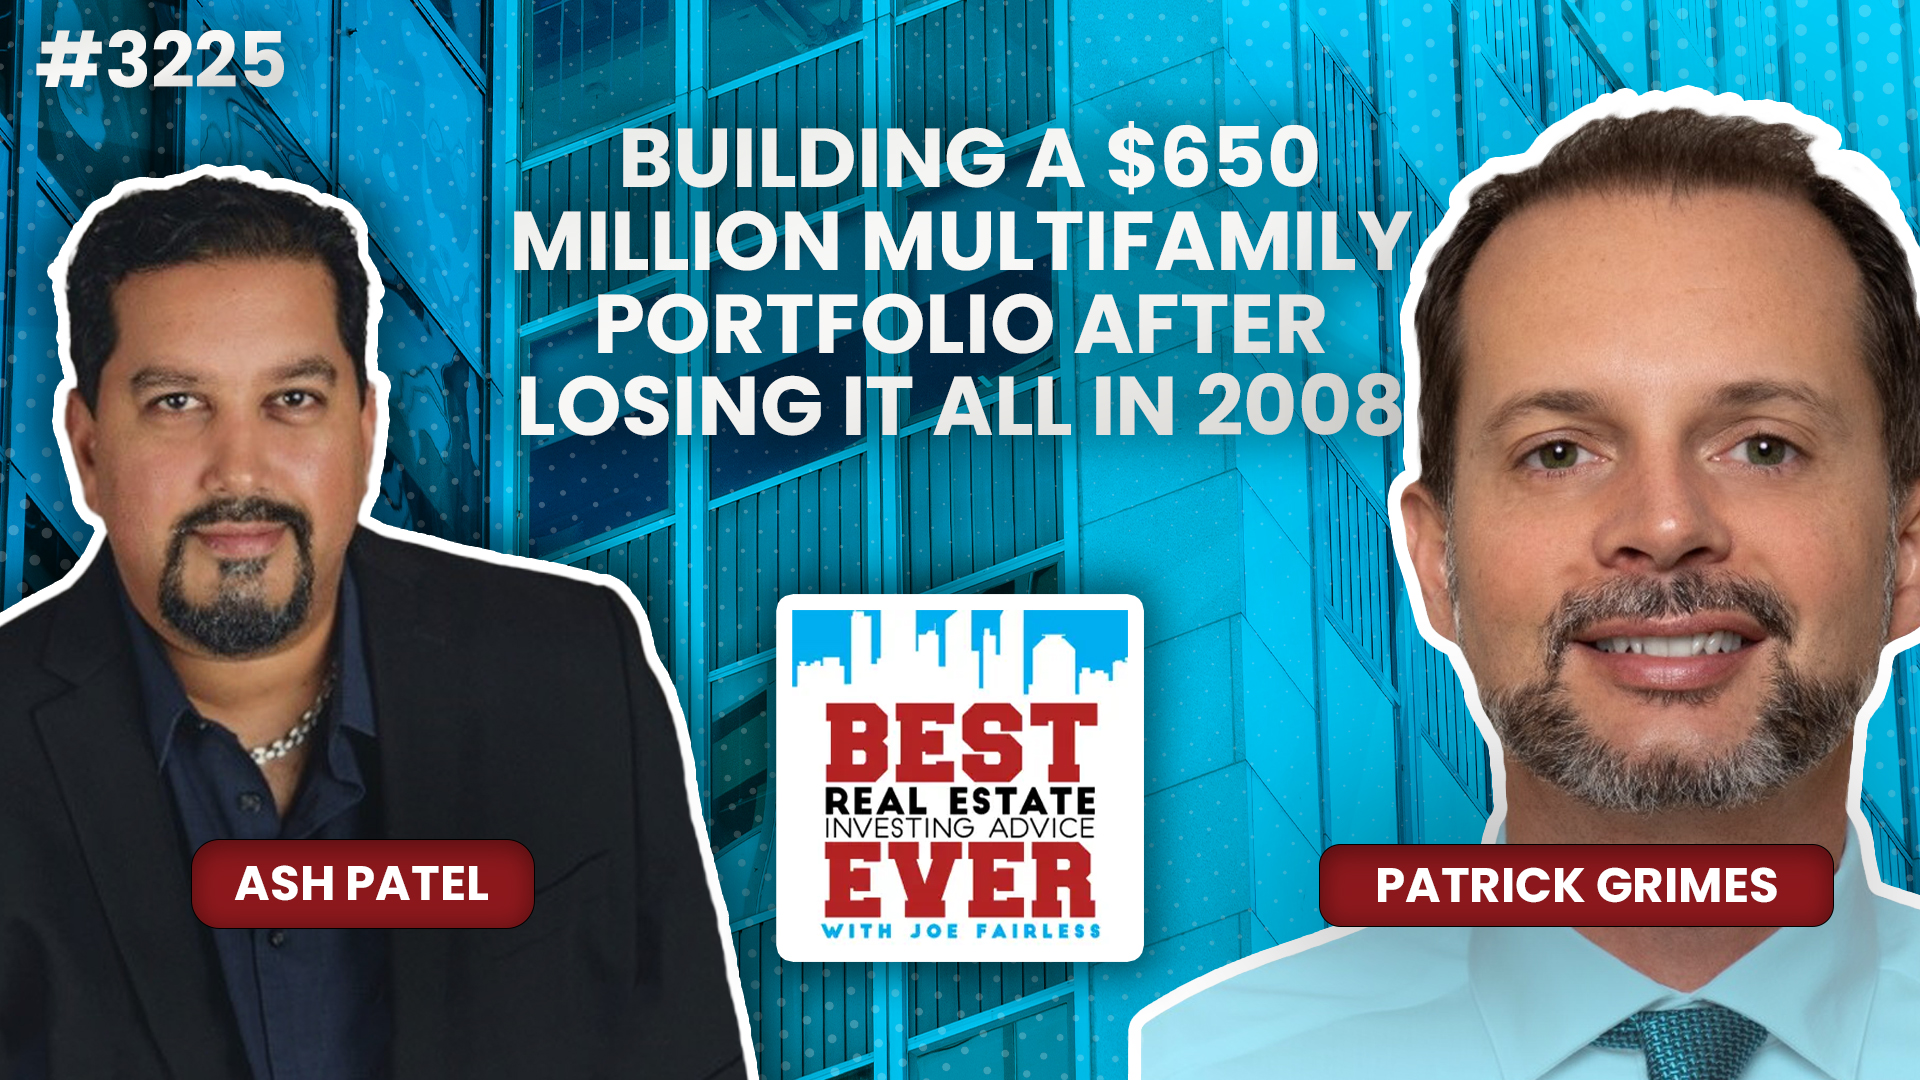 JF3225: Building a $650 Million Multifamily Portfolio After Losing